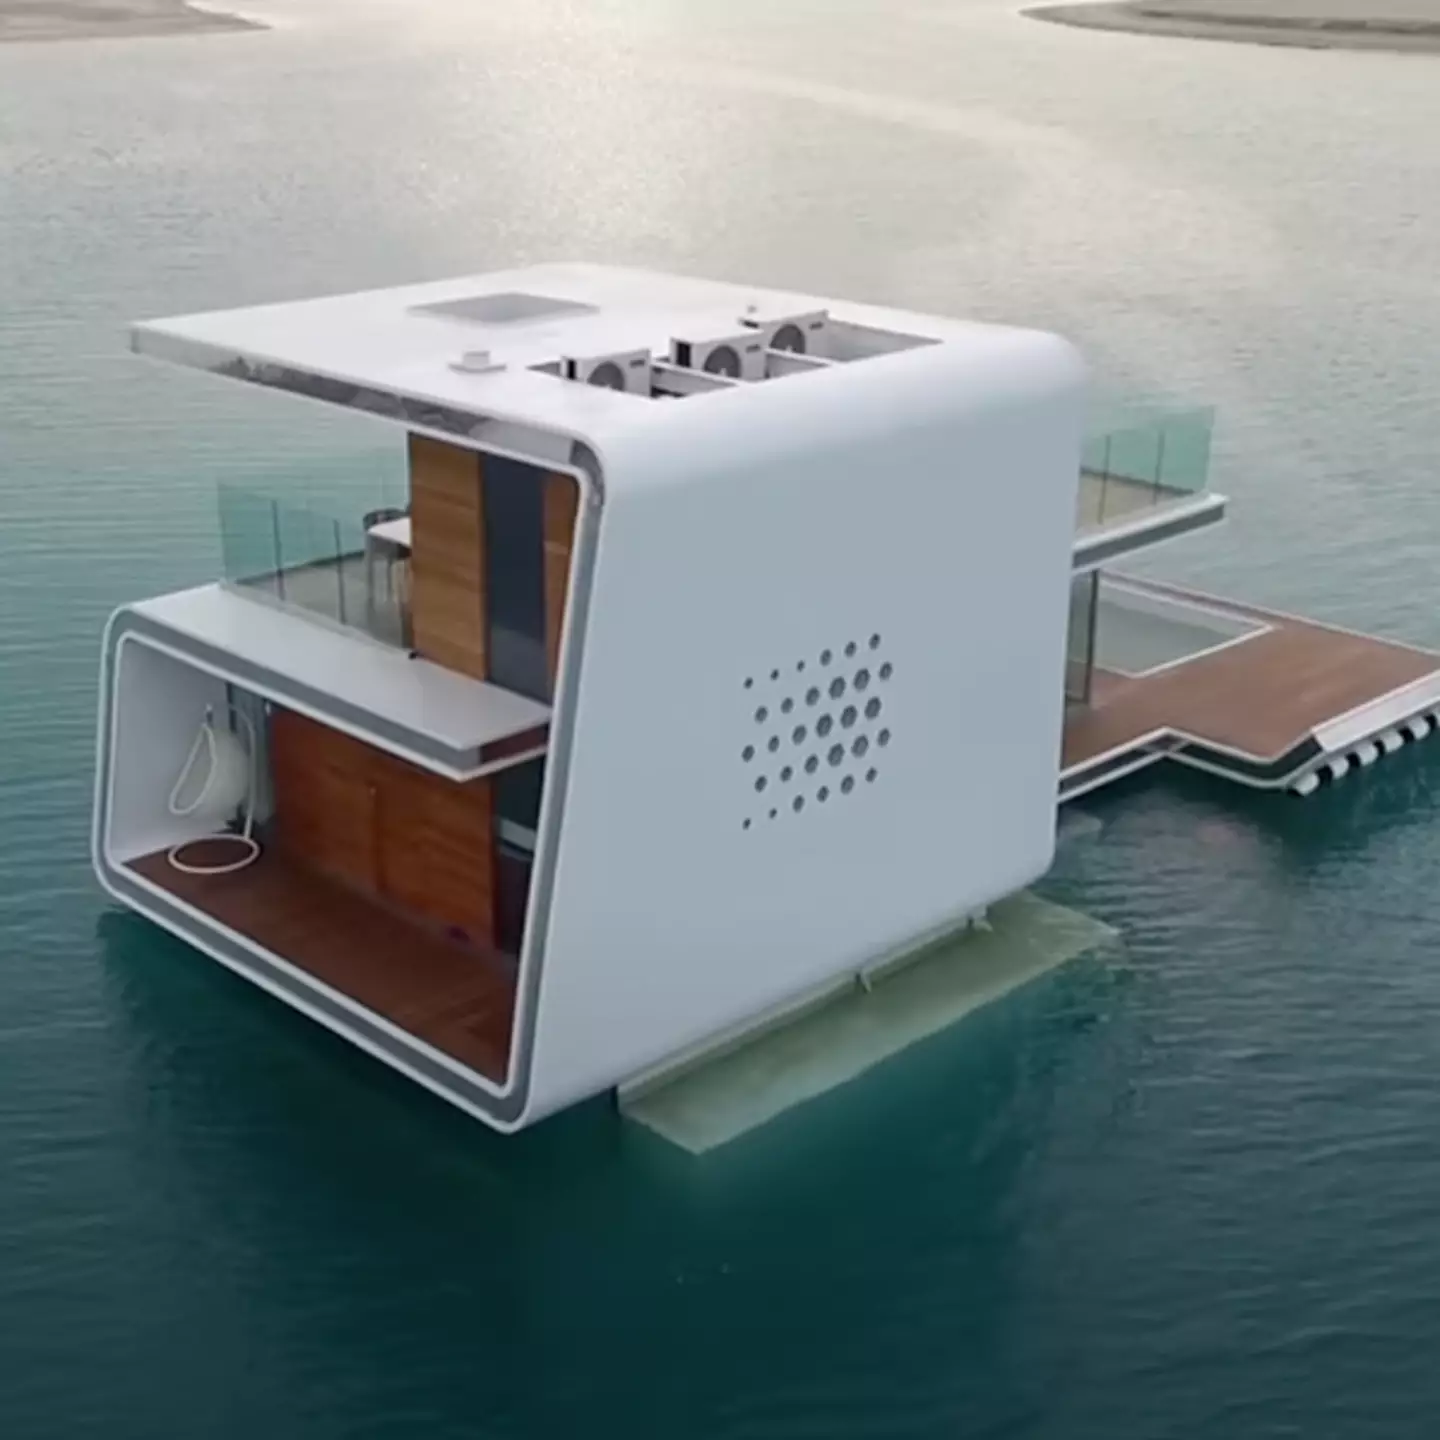 Inside insane $4,700,000 floating house with an underwater bedroom is blowing people's minds